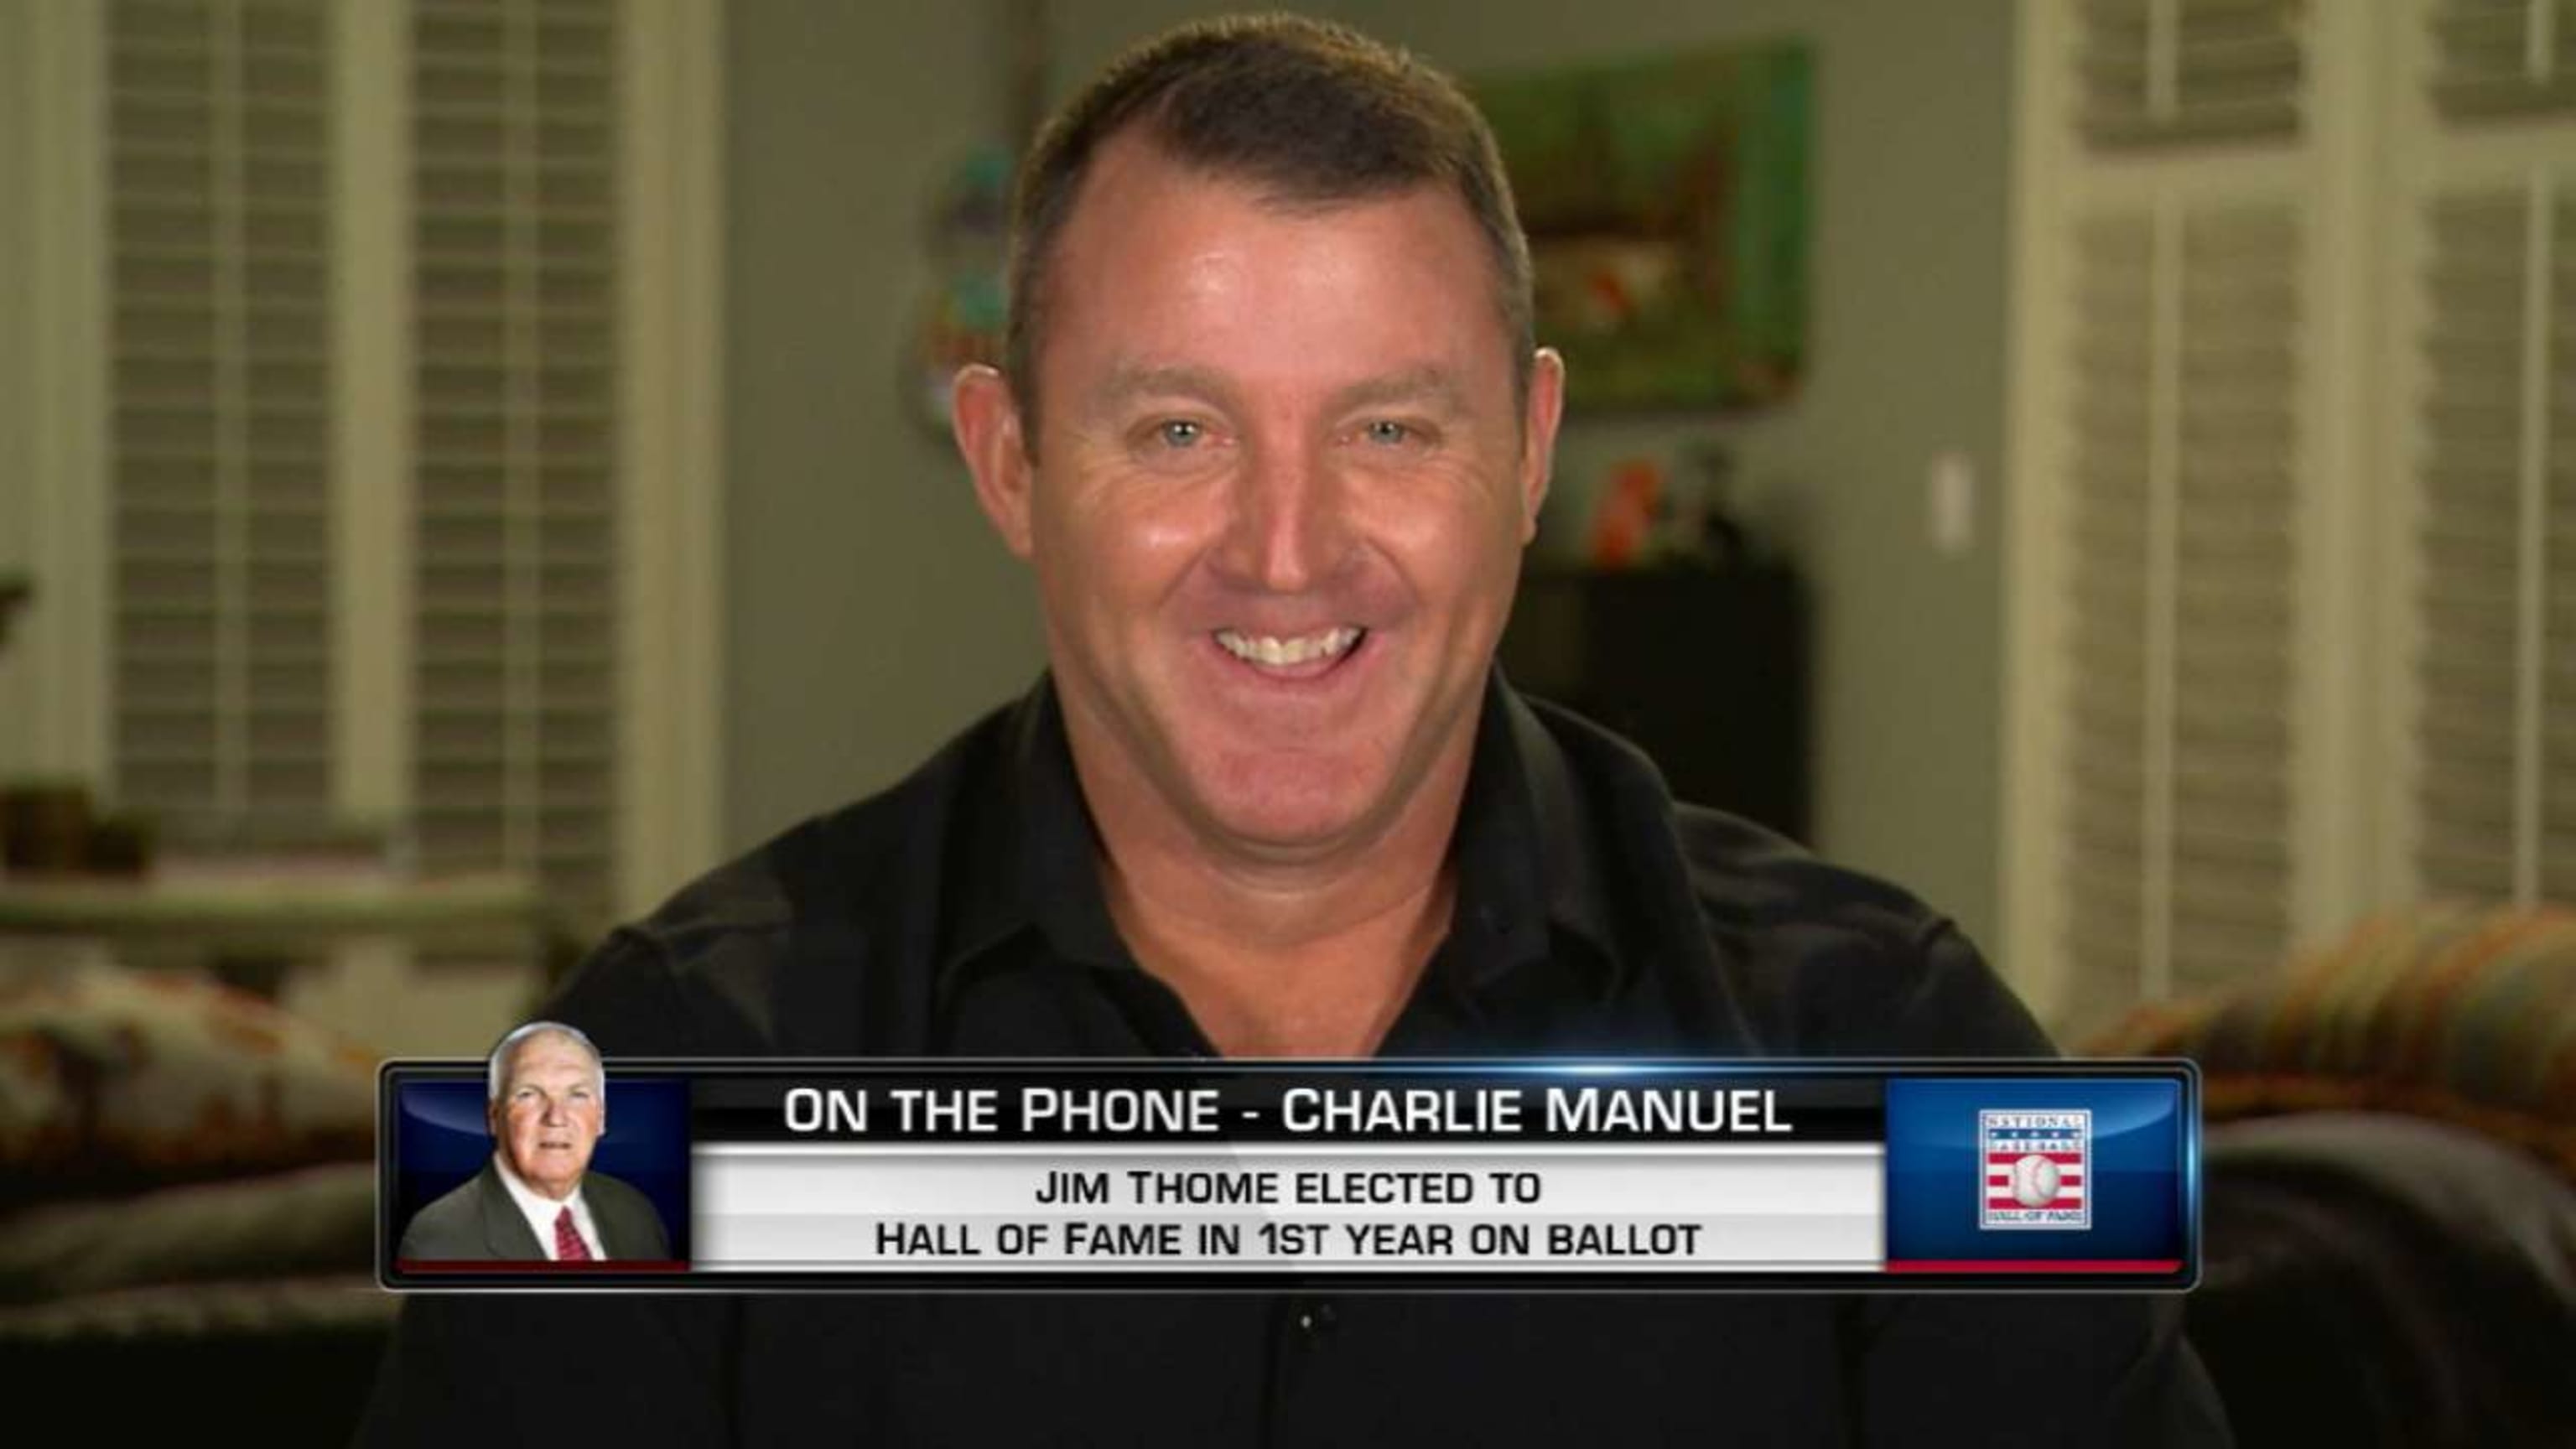 Jim Thome cherishes relationship with Manuel